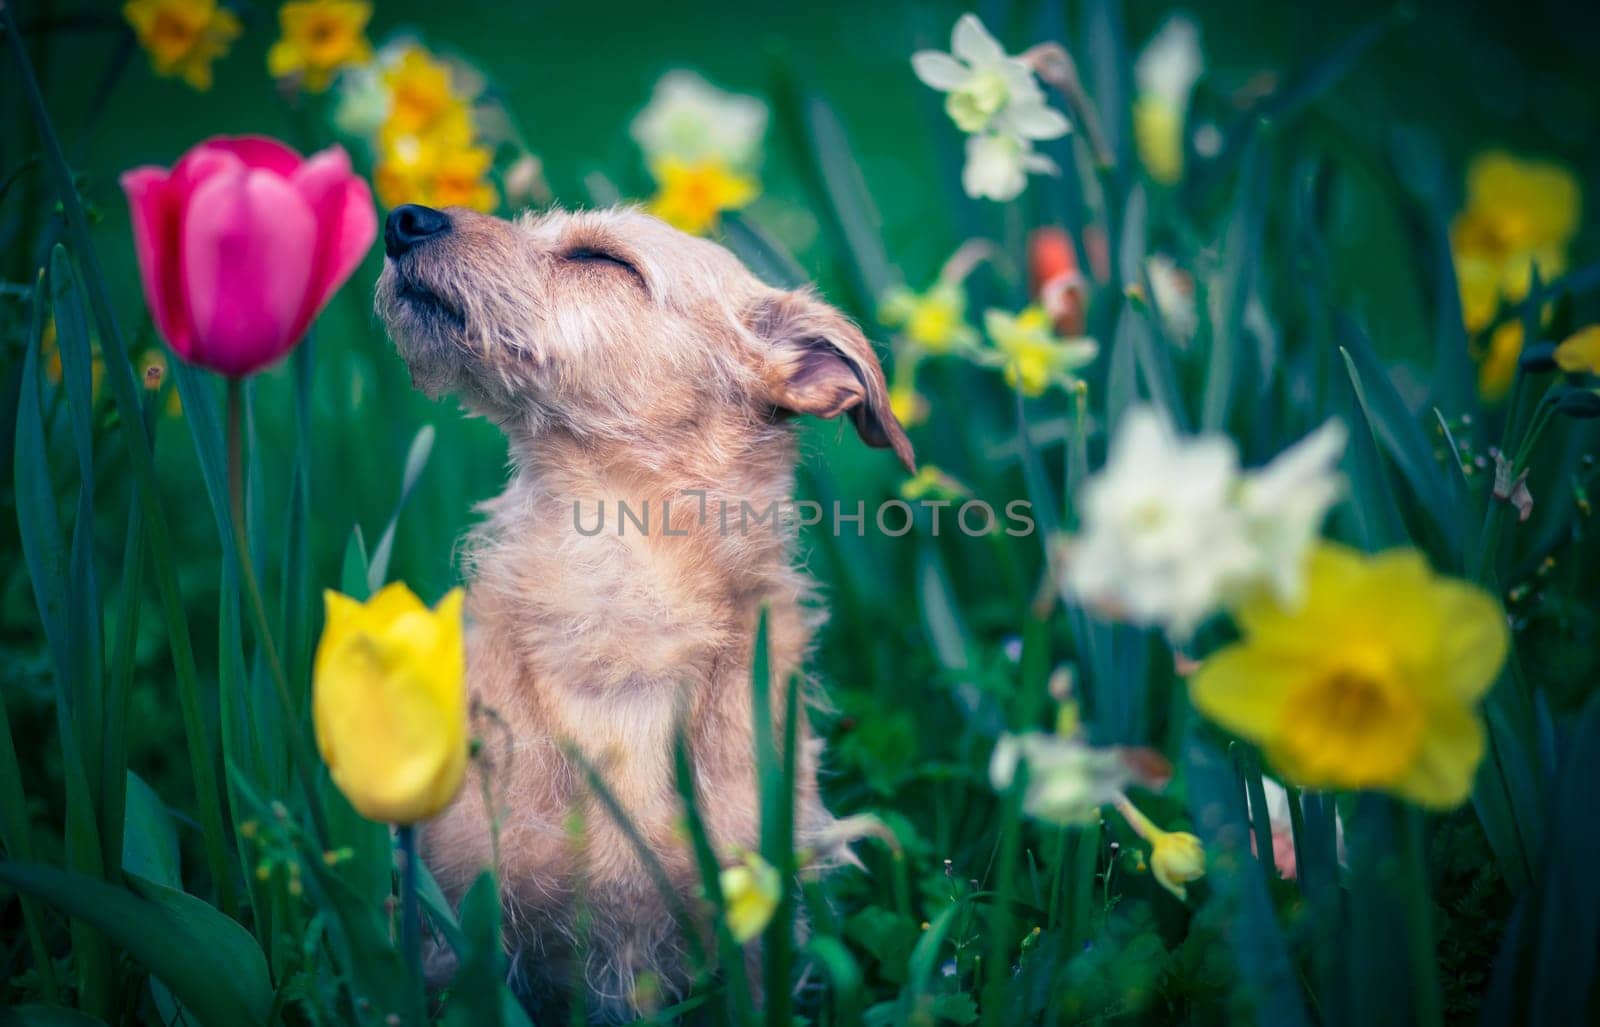 The scent of flowers for a dog